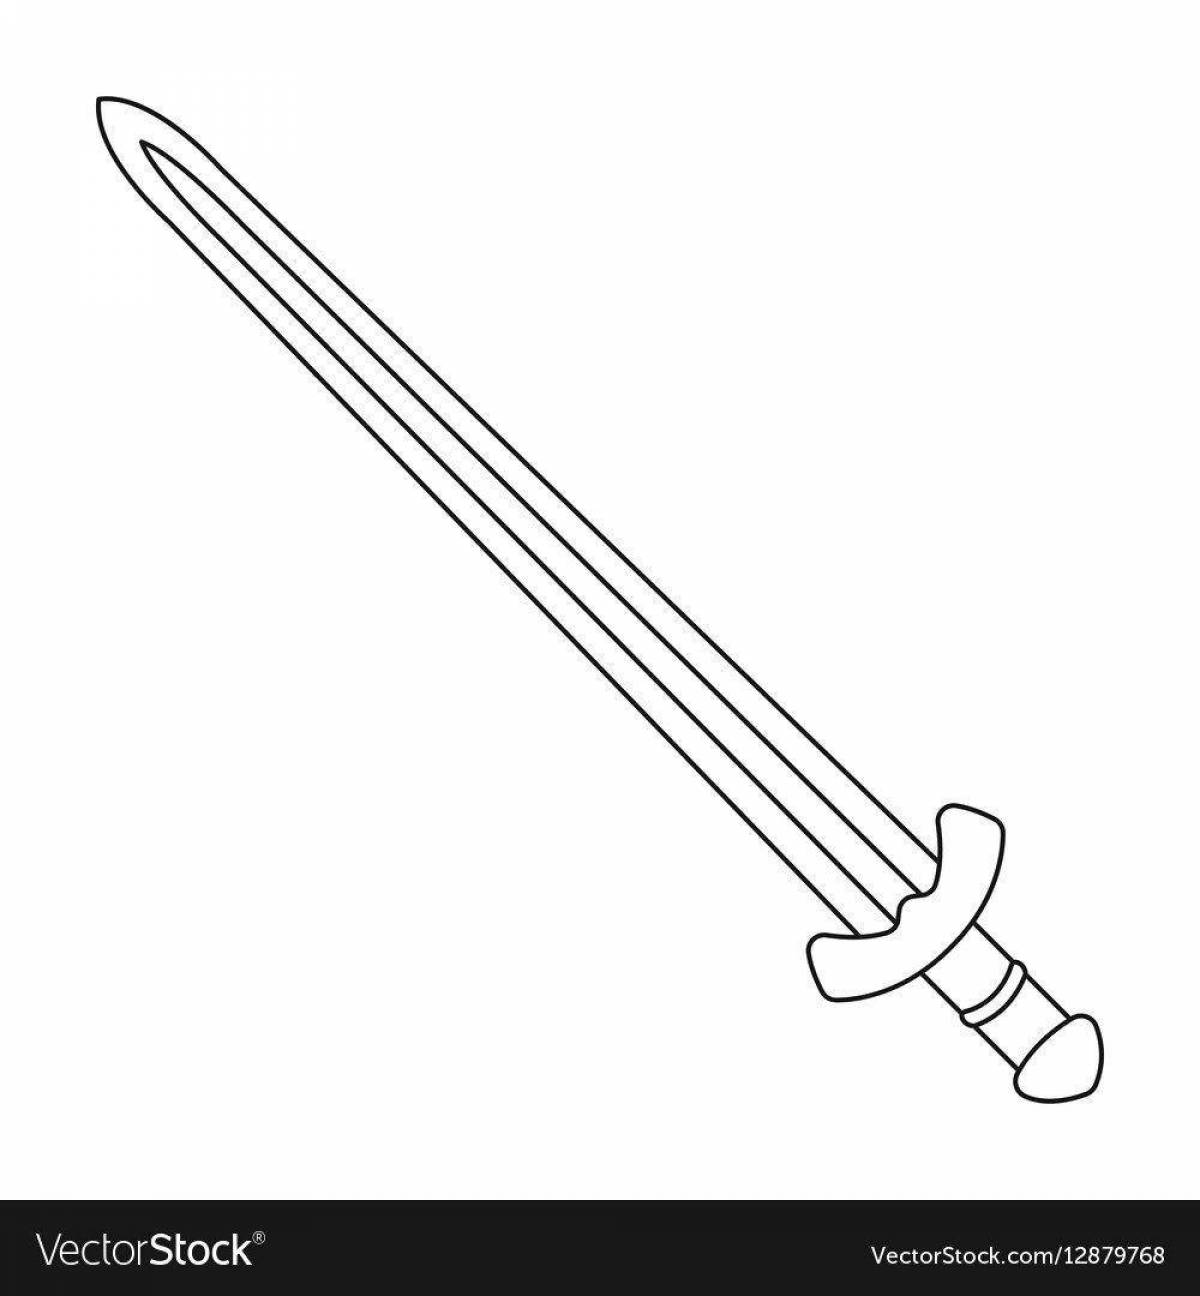 Coloring page with impact laser sword